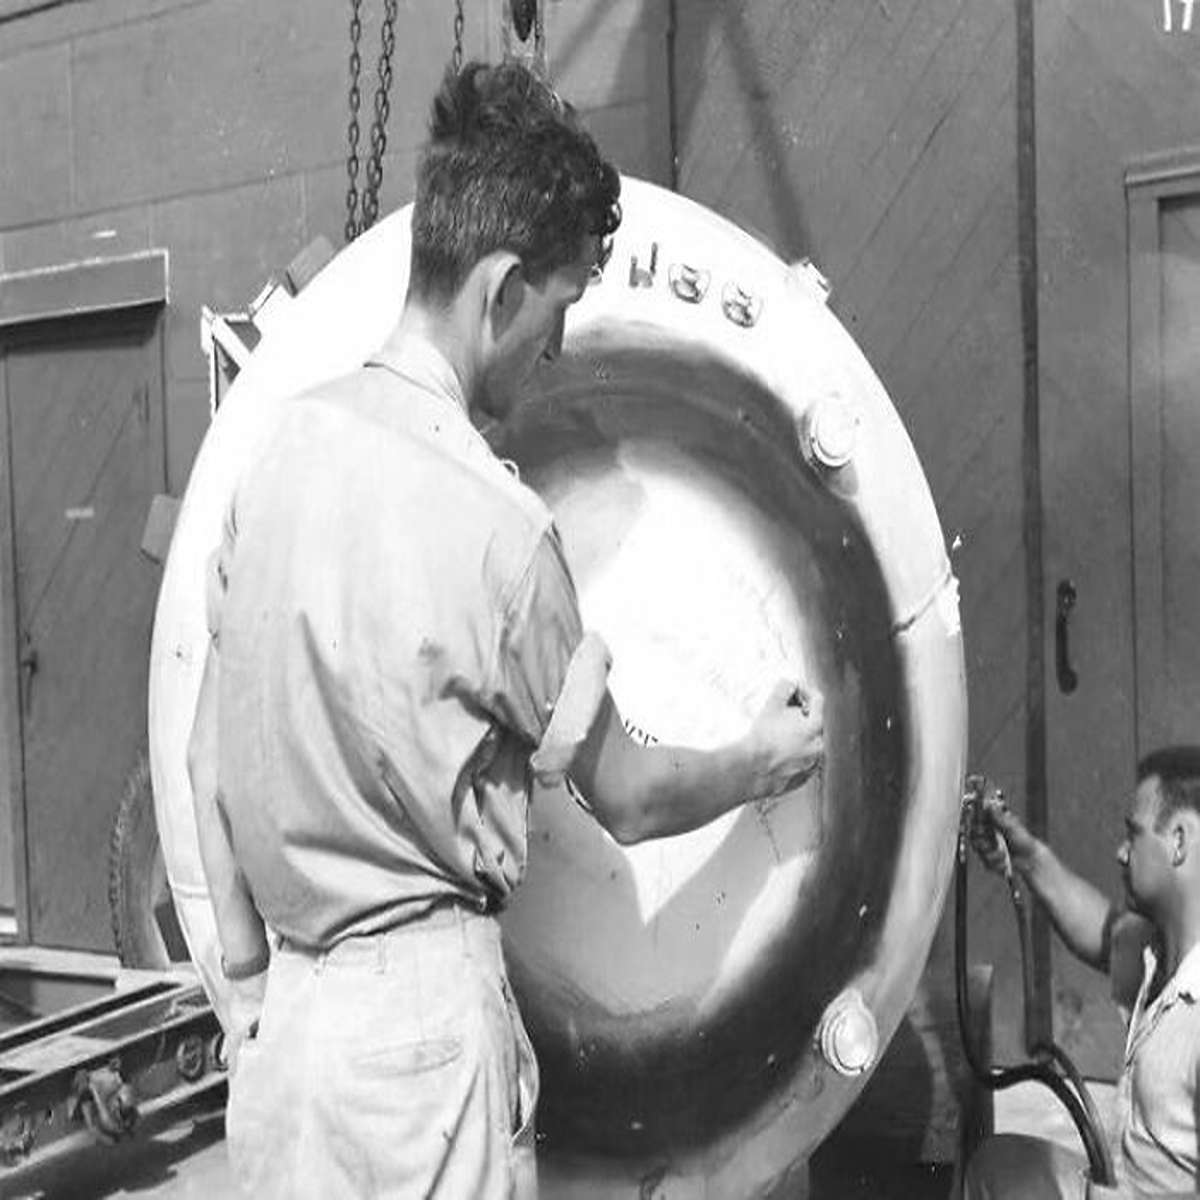 Nuclear Physicist Norman Ramsey Signs The 'Fat Man' Nuclear Weapon, Later Dropped On Nagasaki On 6 August, 1945. 60-80,000 Japanese Civilians Were Killed As Large Swaths Of The City Was Instantly Obliterated